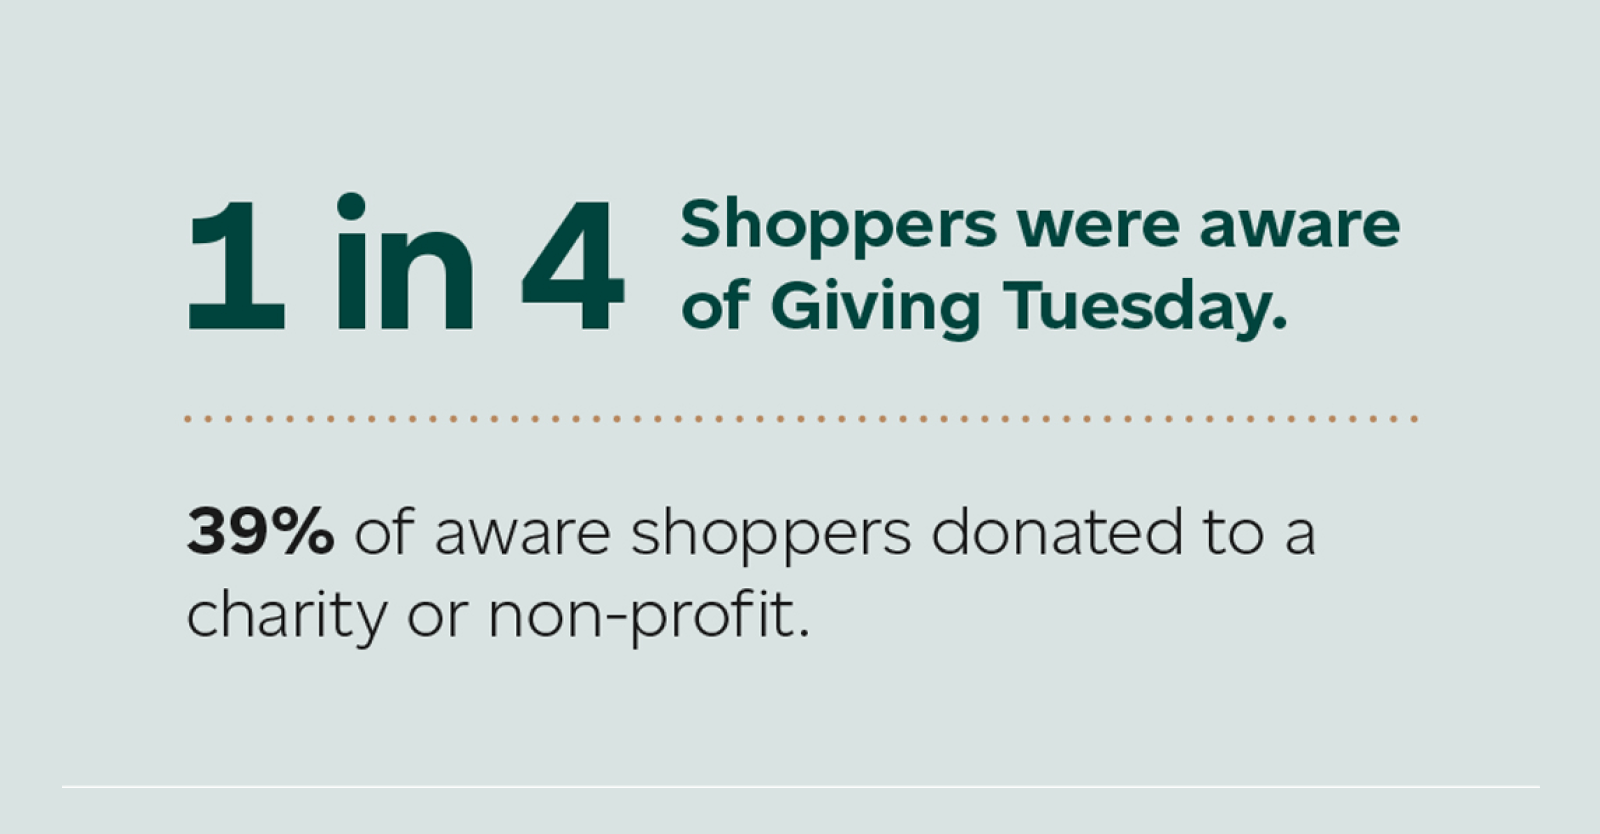 1 in 4 shoppers were aware of Giving Tuesday. 39% of aware shoppers donated to a charity or non-profit.